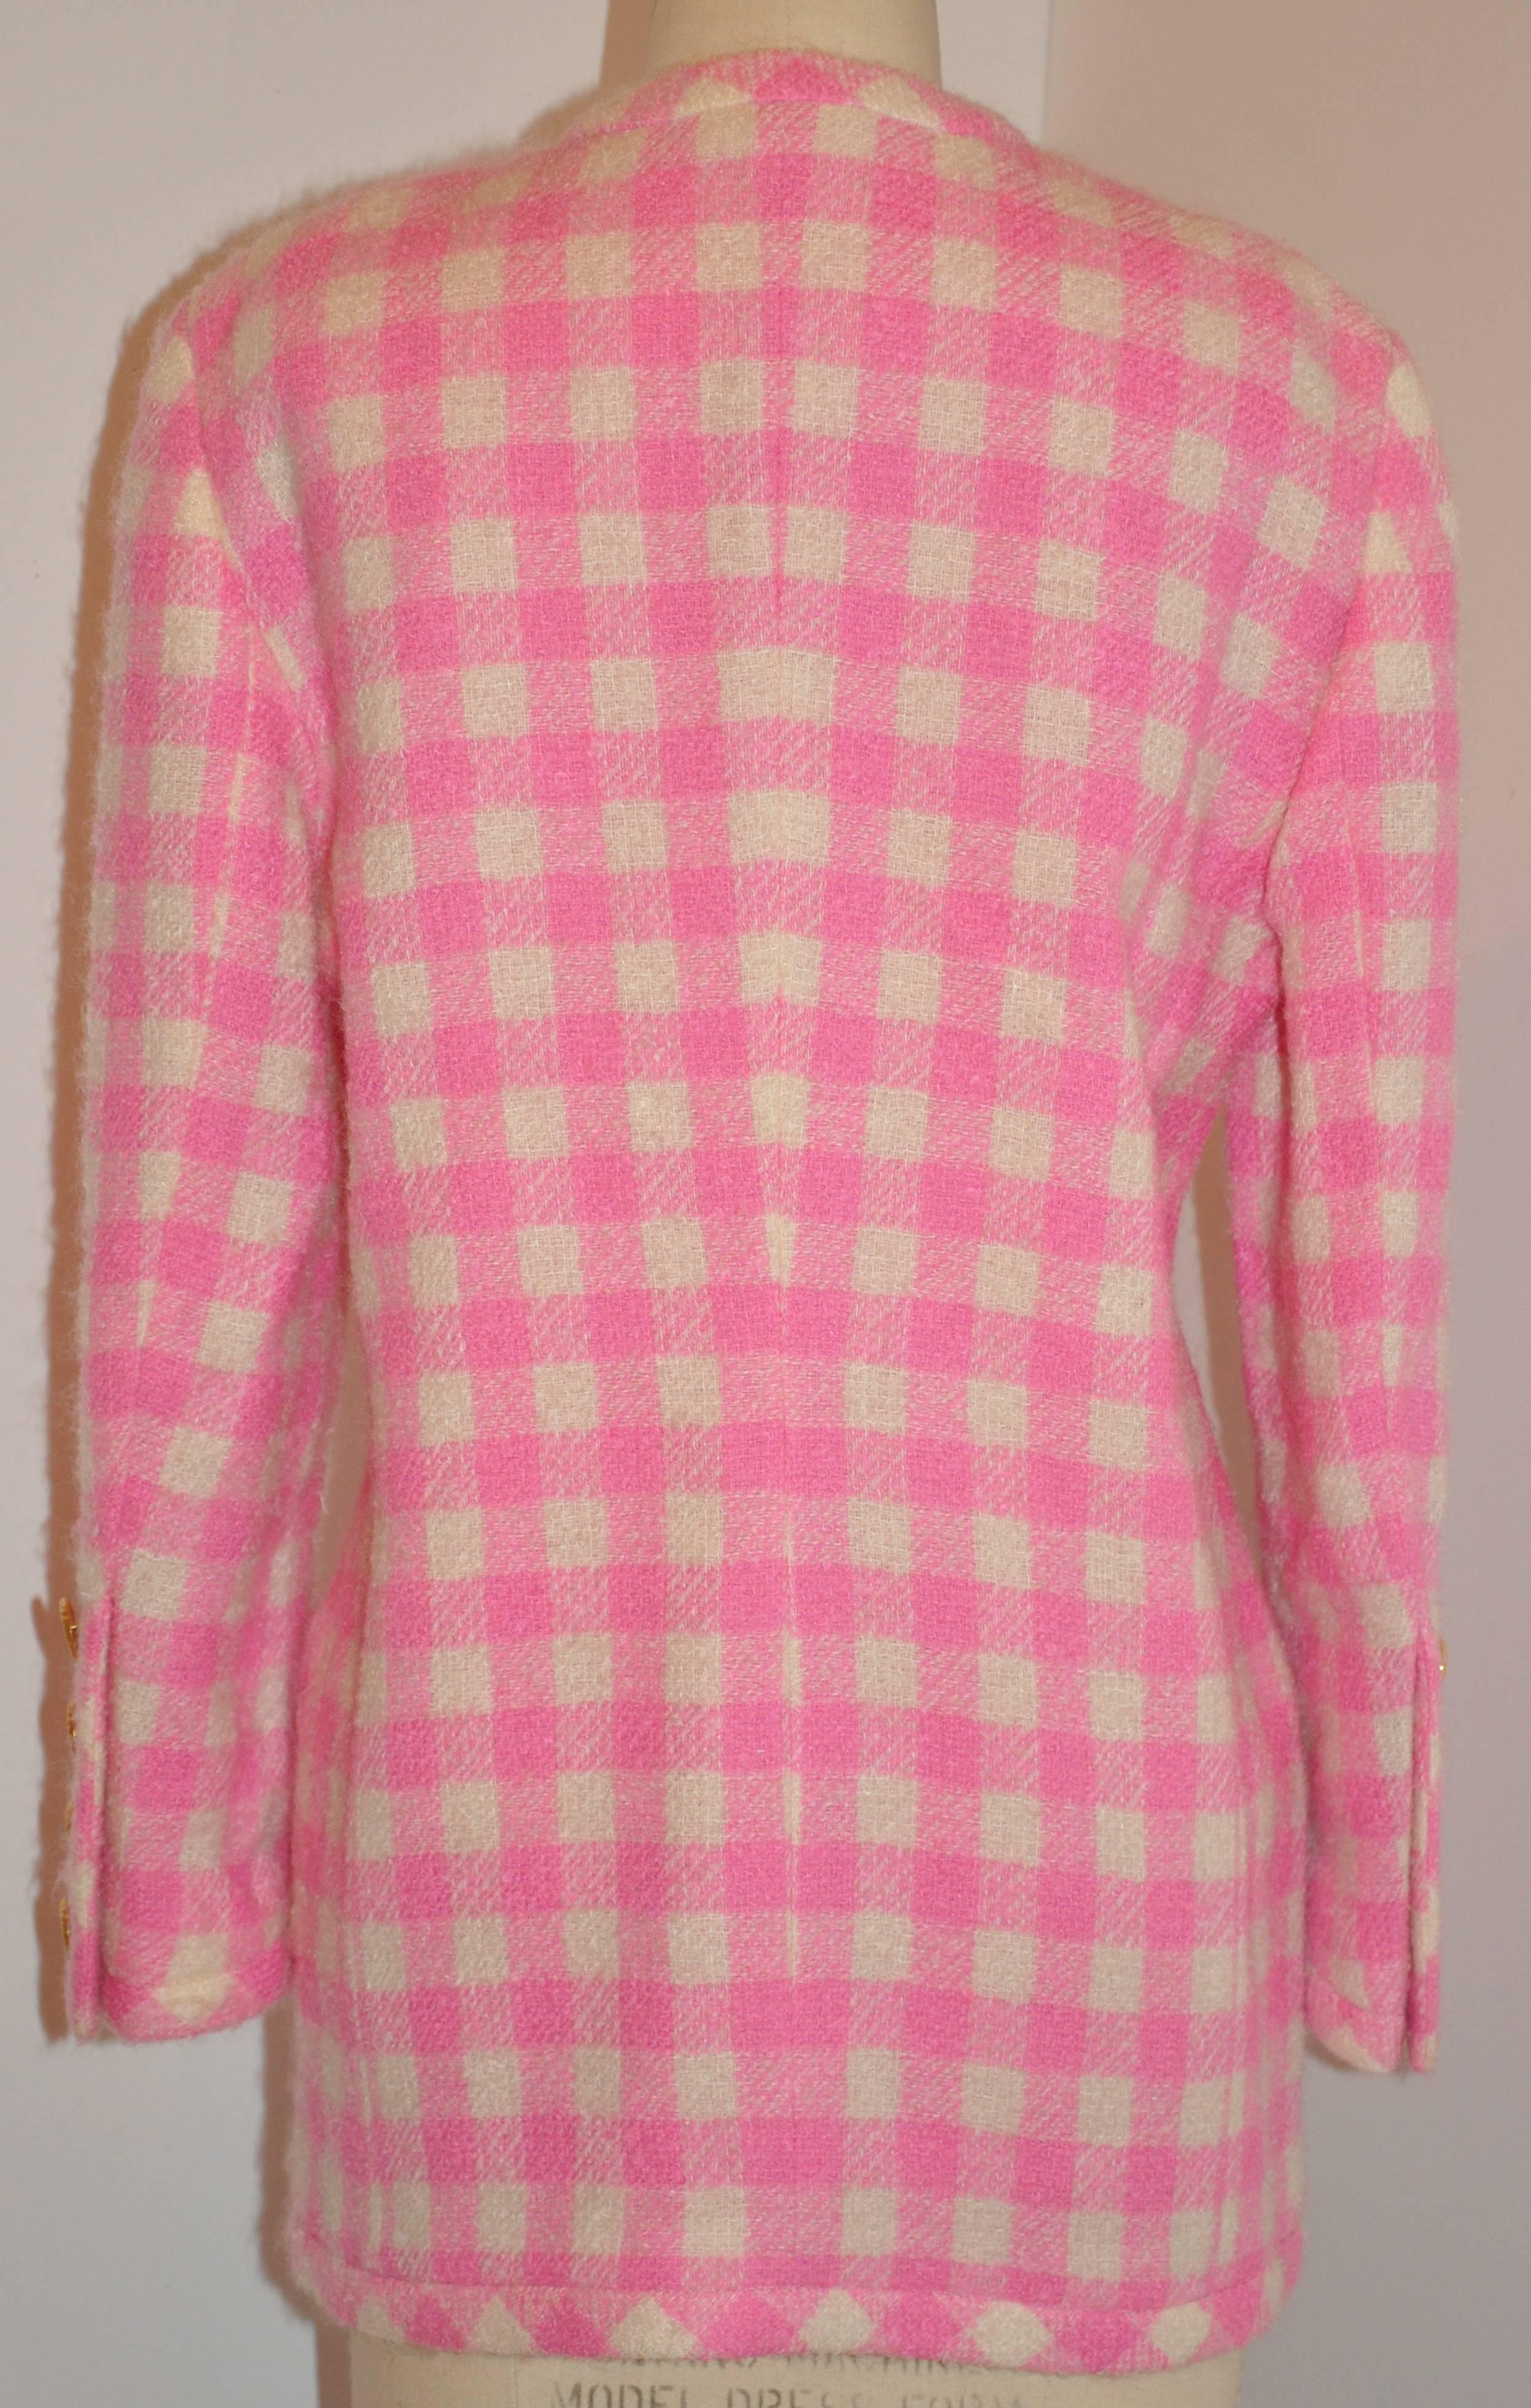         Escada by Margaretha Ley wonderfully elegant fully lined bold pink & cream checkered jacket is detailed with five matching pink with gold-tone buttons in front as well as four patch pockets finished with matching buttons. The sleeve's cuff